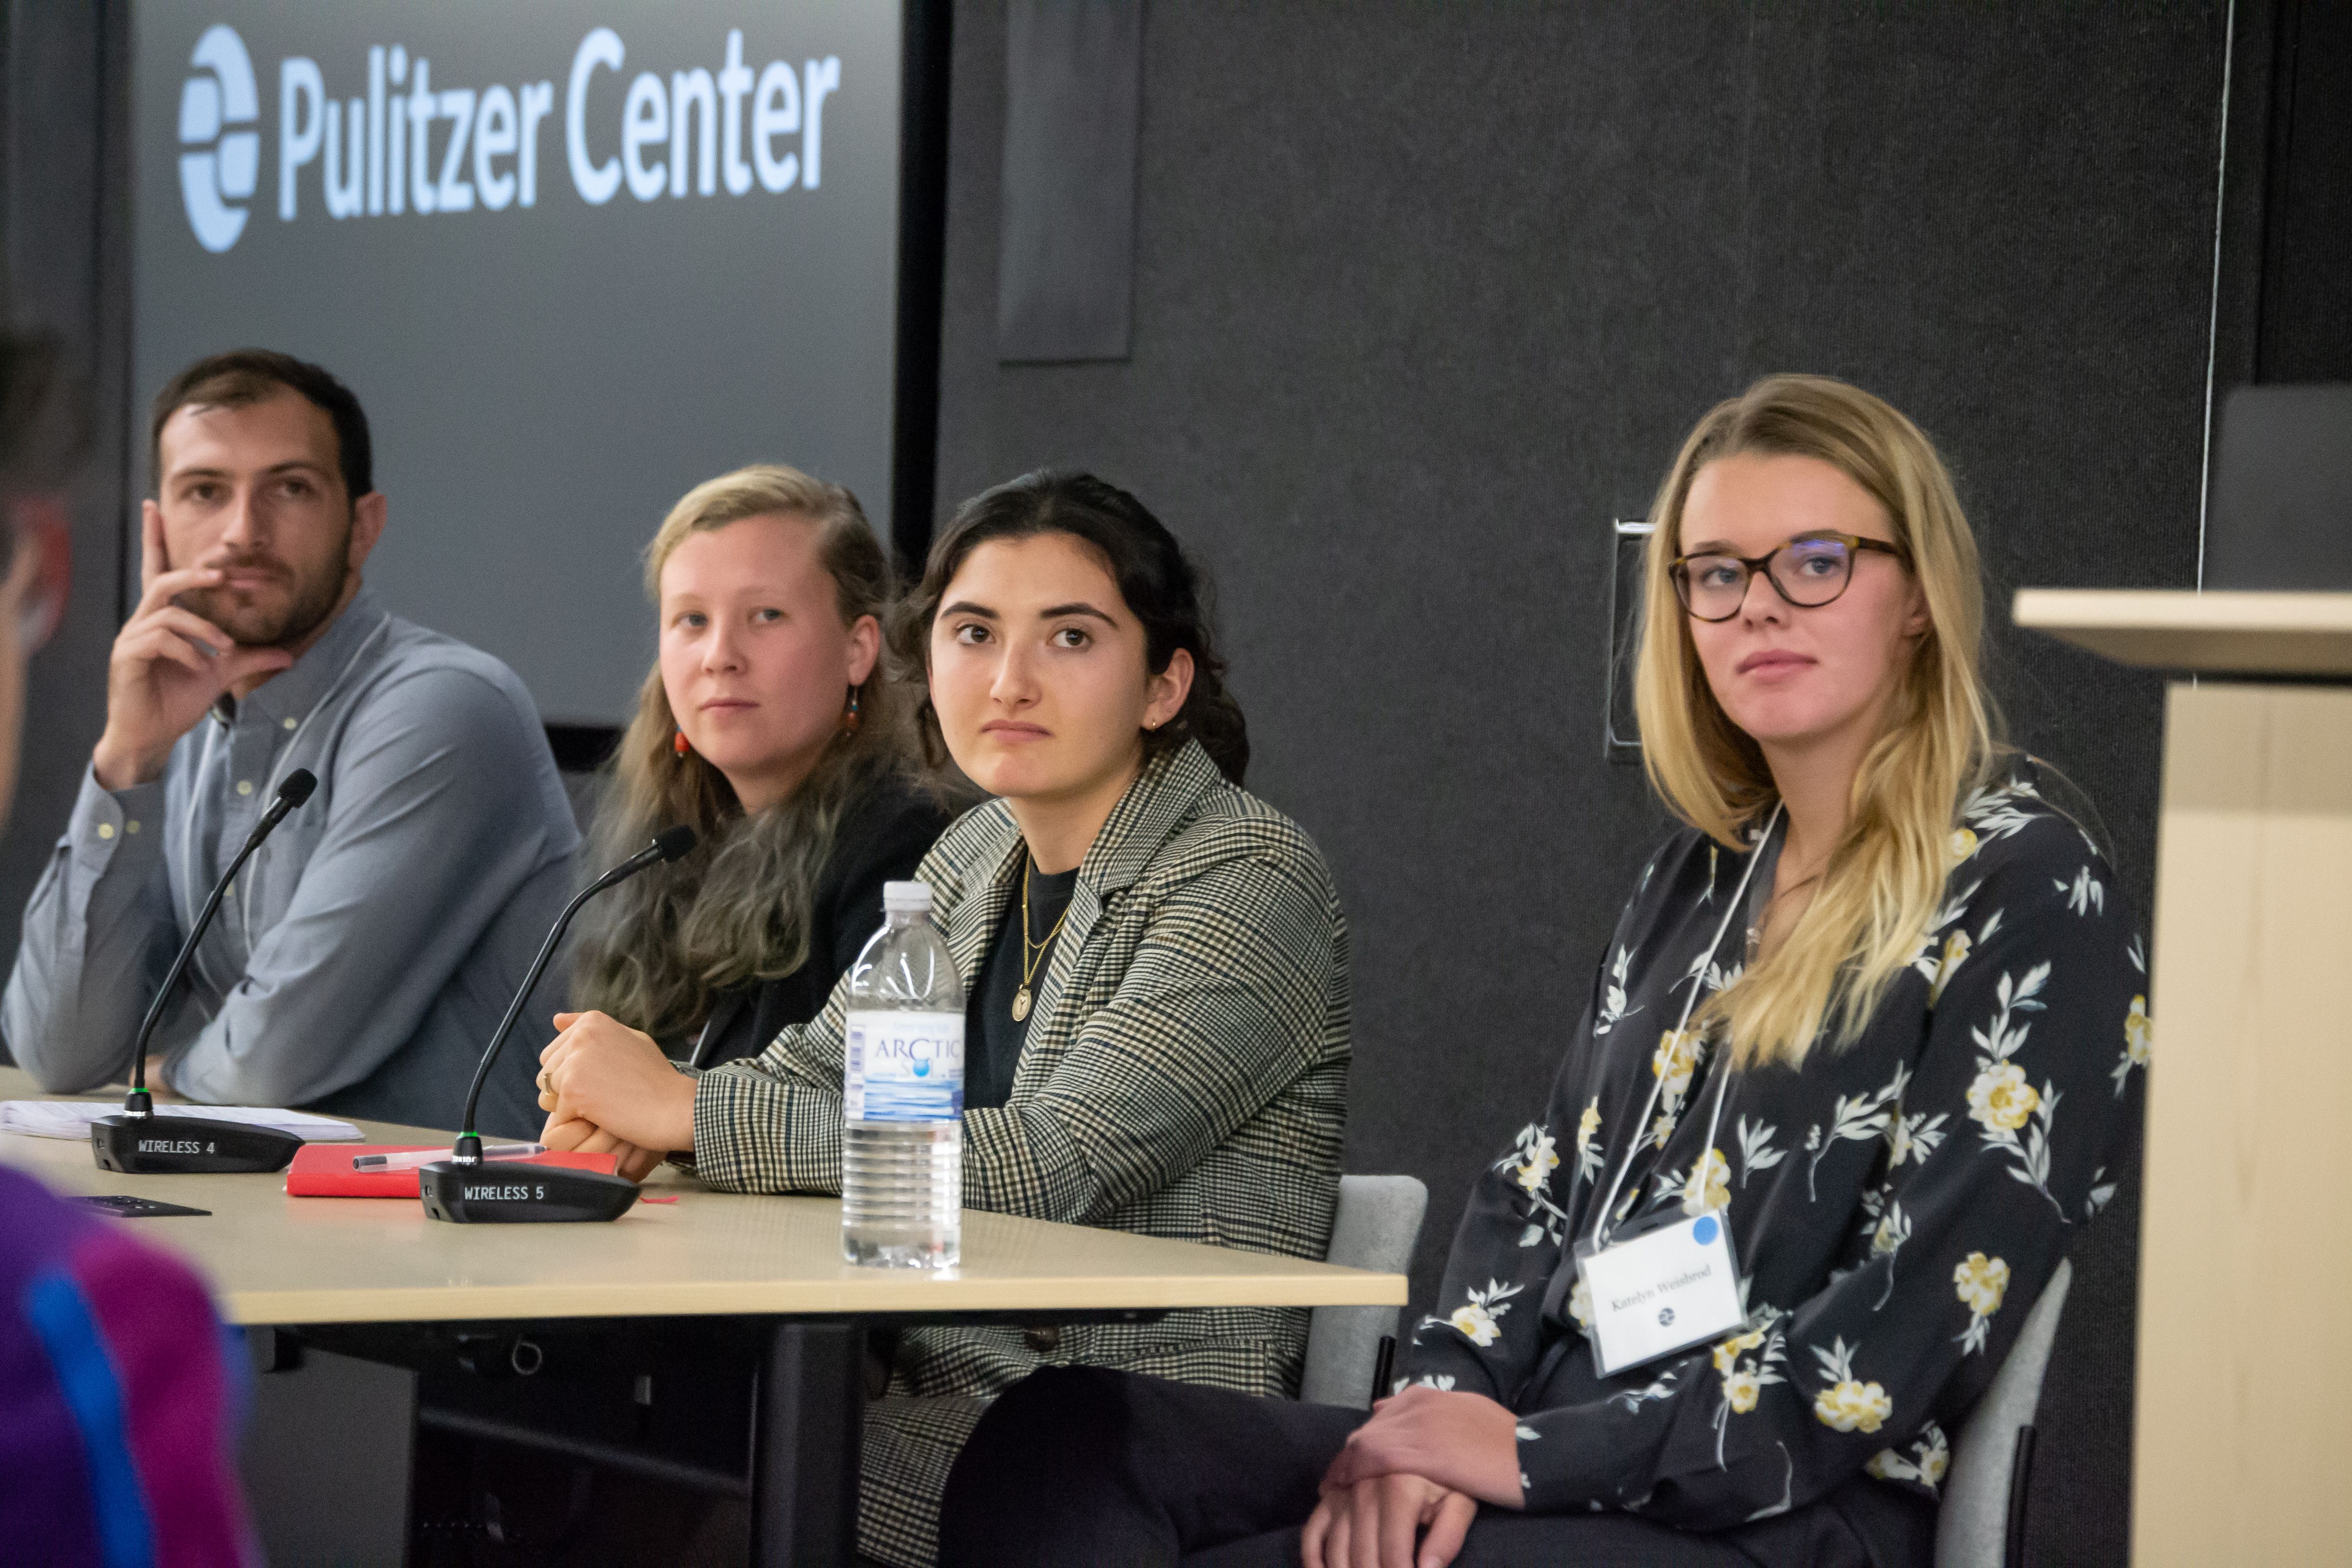 Panelists Daniel Merino from Boston University College of Communication, Emma Johnson from Yale University School of Forestry & Environmental Studies, Audrey Fromson from the University of Chicago, and Katelyn Weisbrod from the University of Iowa listen to a question from the audience. Image by Nora Moraga-Lewy. United States, 2019.